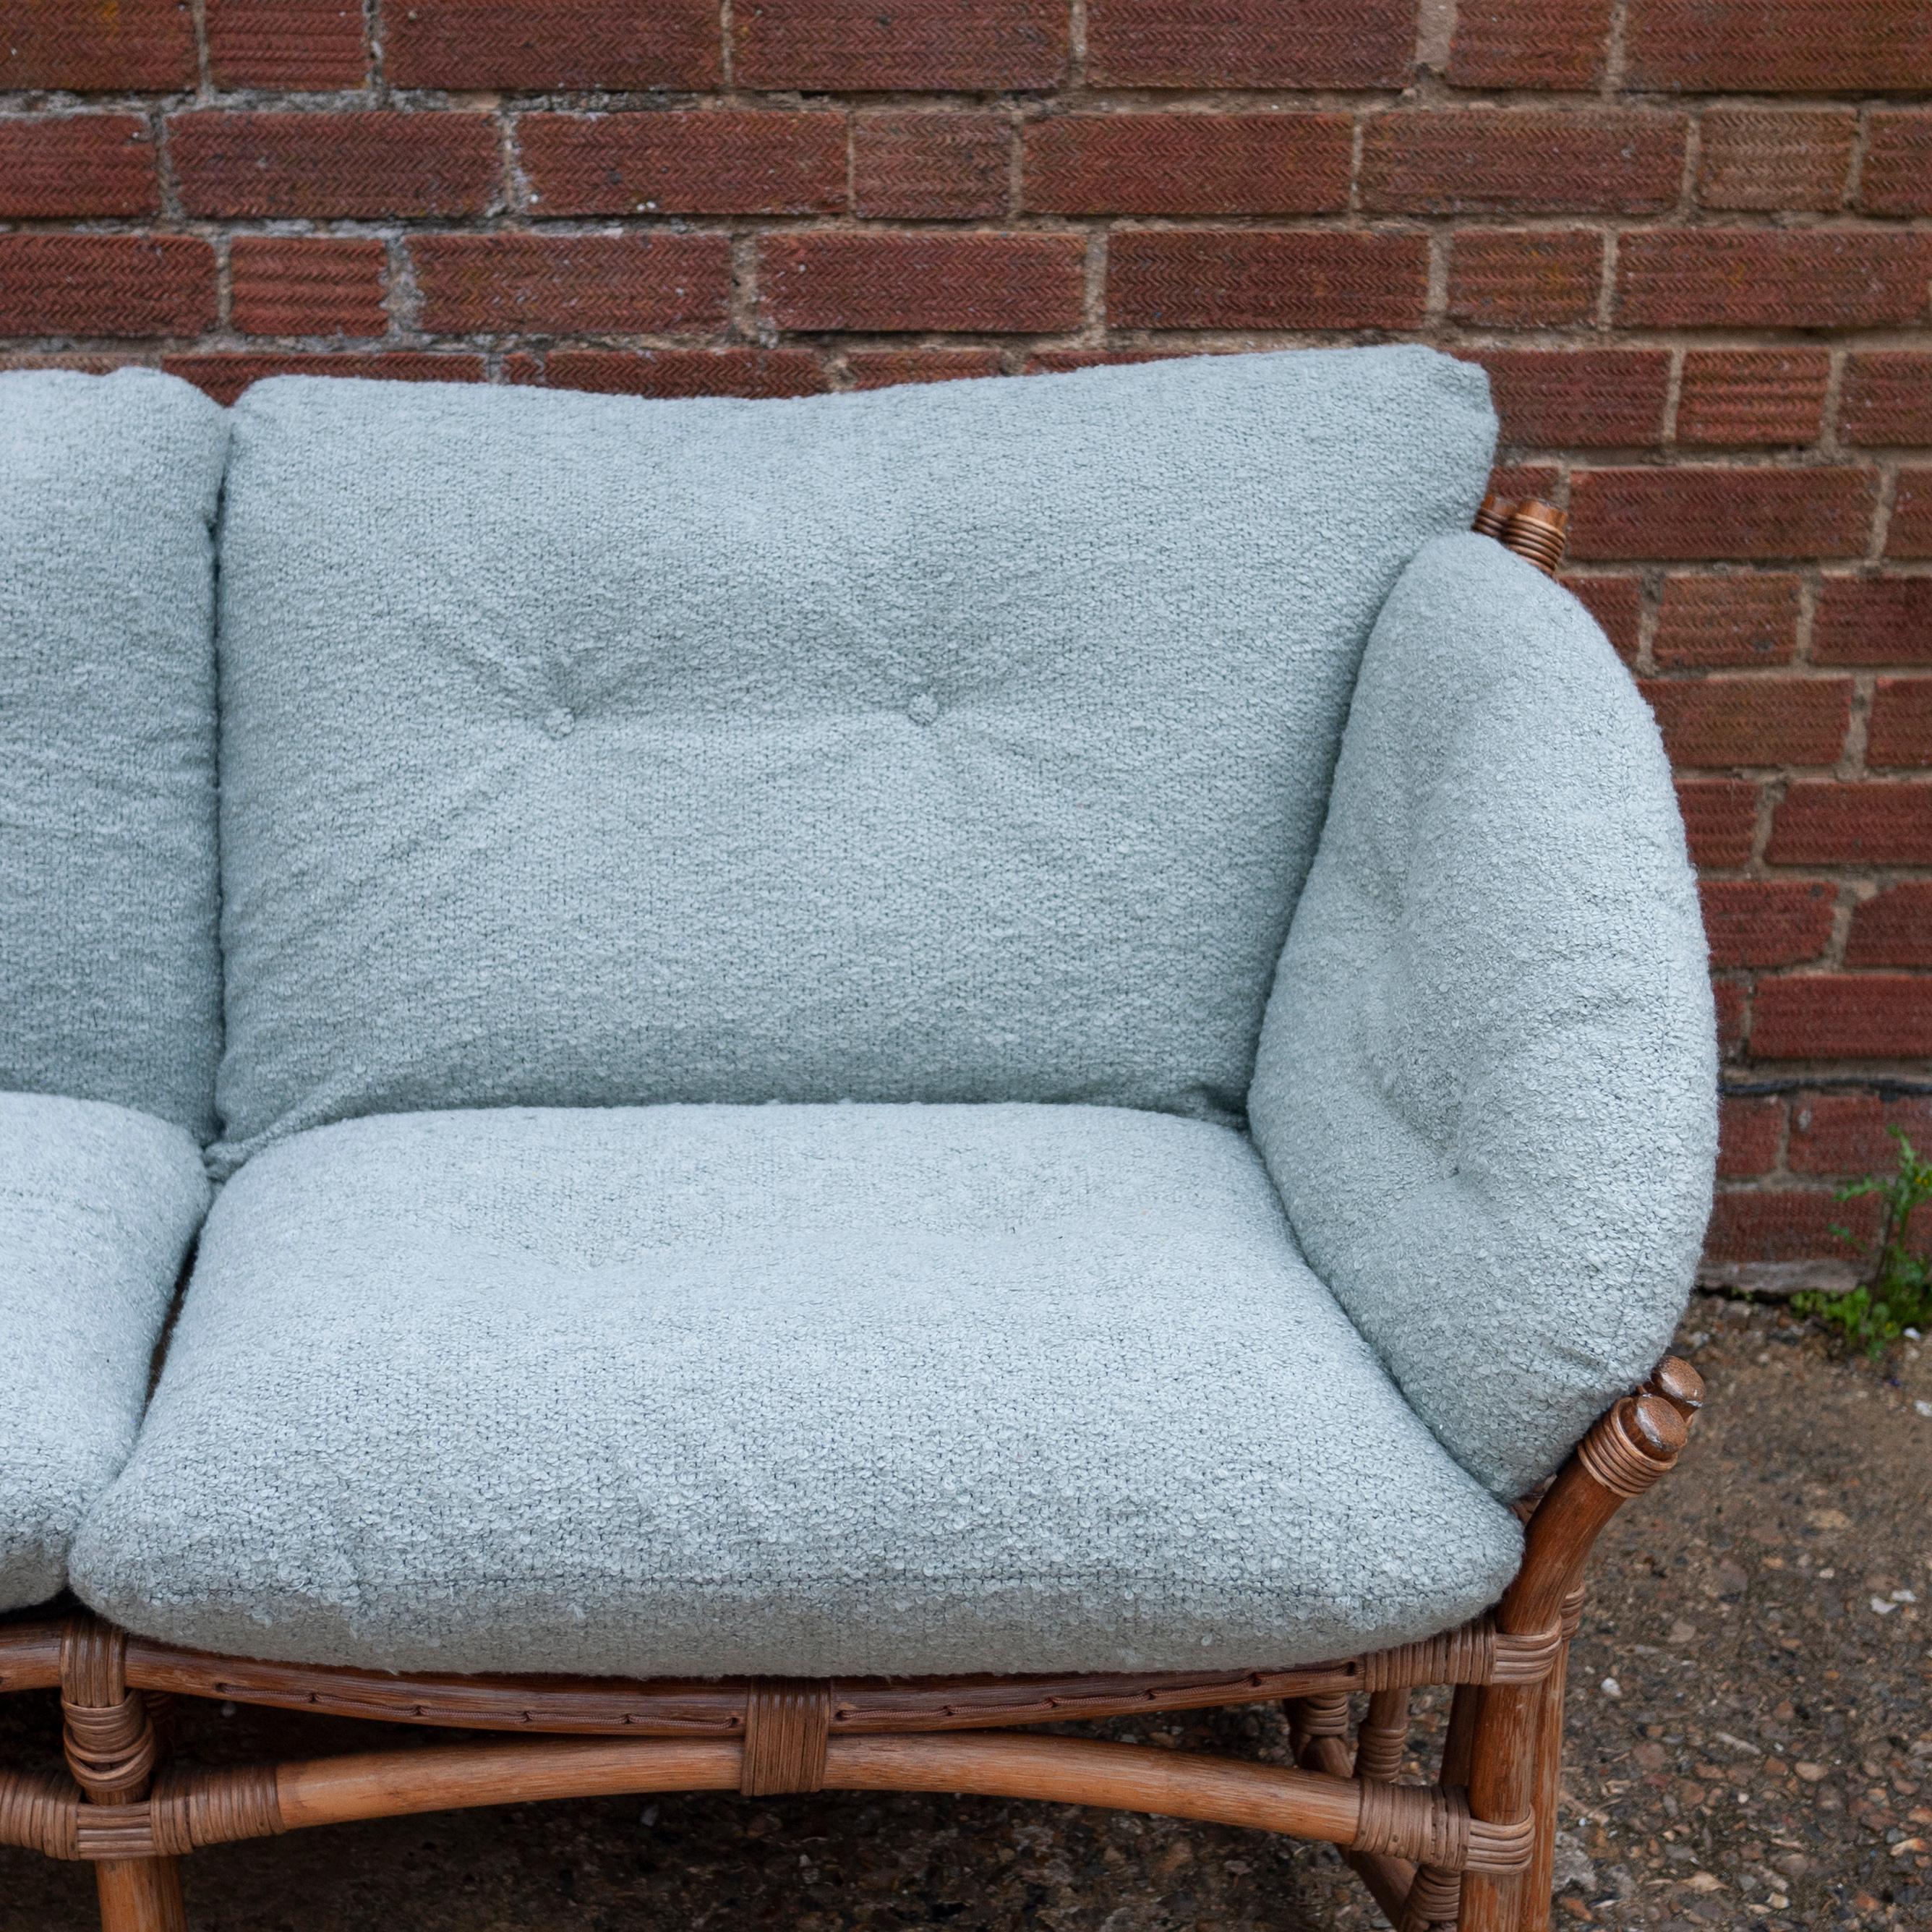 A vintage bamboo sofa with newly upholstered boucle fabric.

Manufacturer - Unknown

Design Period - 1970 to 1979

Attribution Marks - n/a

Style - Vintage, Mid-Century

Detailed Condition - Good in keeping with age and use.

Restoration